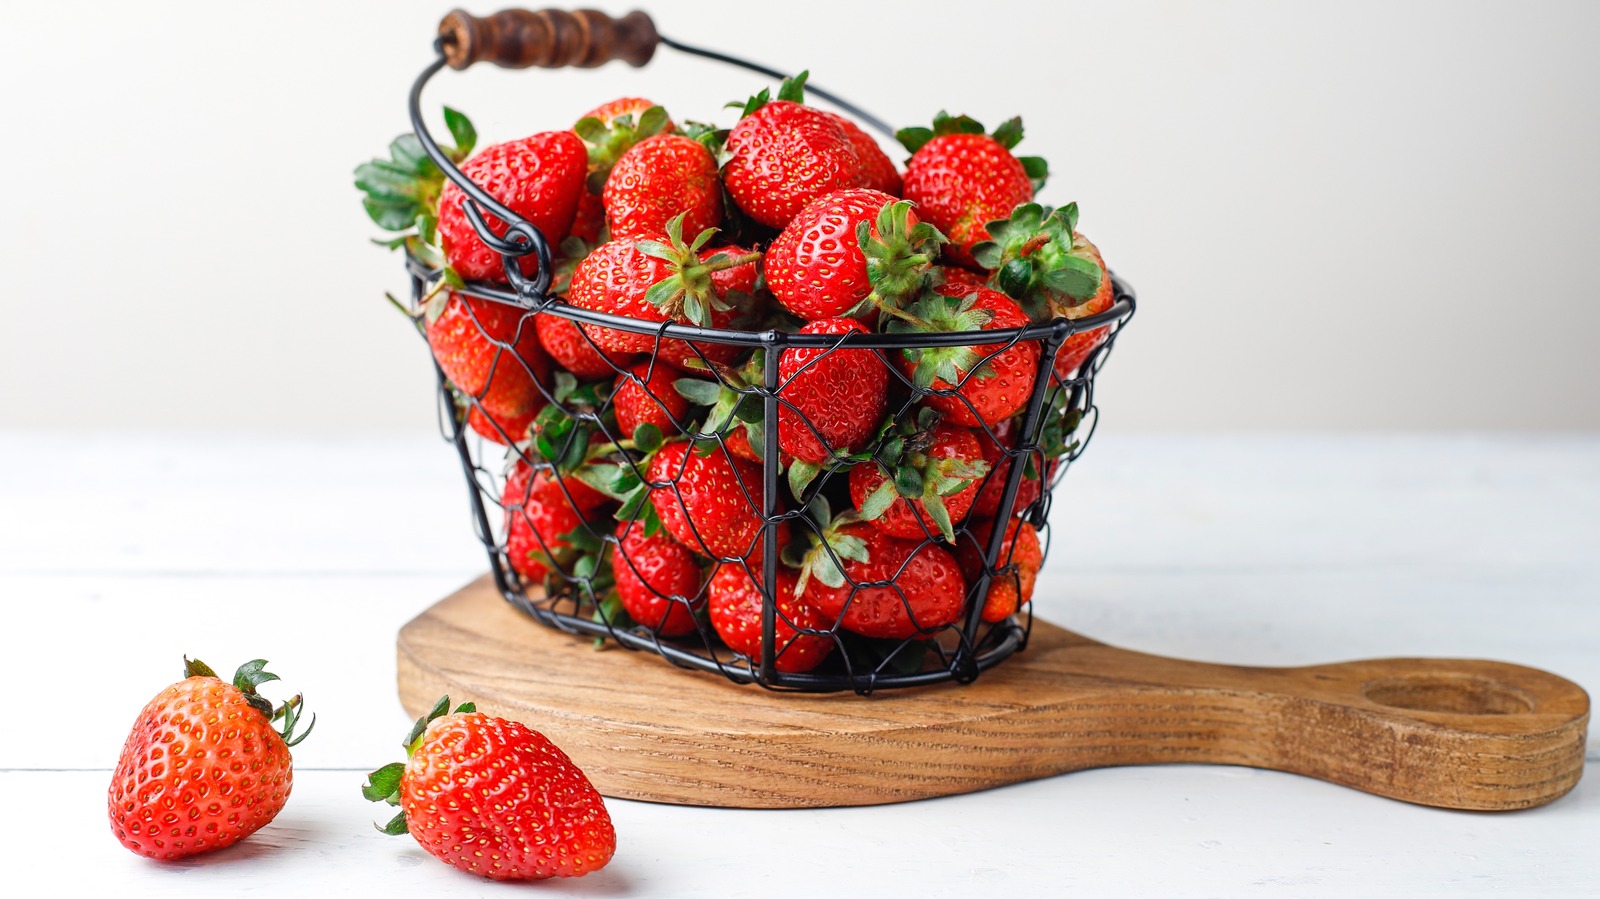 https://www.thedailymeal.com/img/gallery/the-tiktok-strawberry-hulling-hack-that-will-make-life-so-much-easier/l-intro-1683841198.jpg